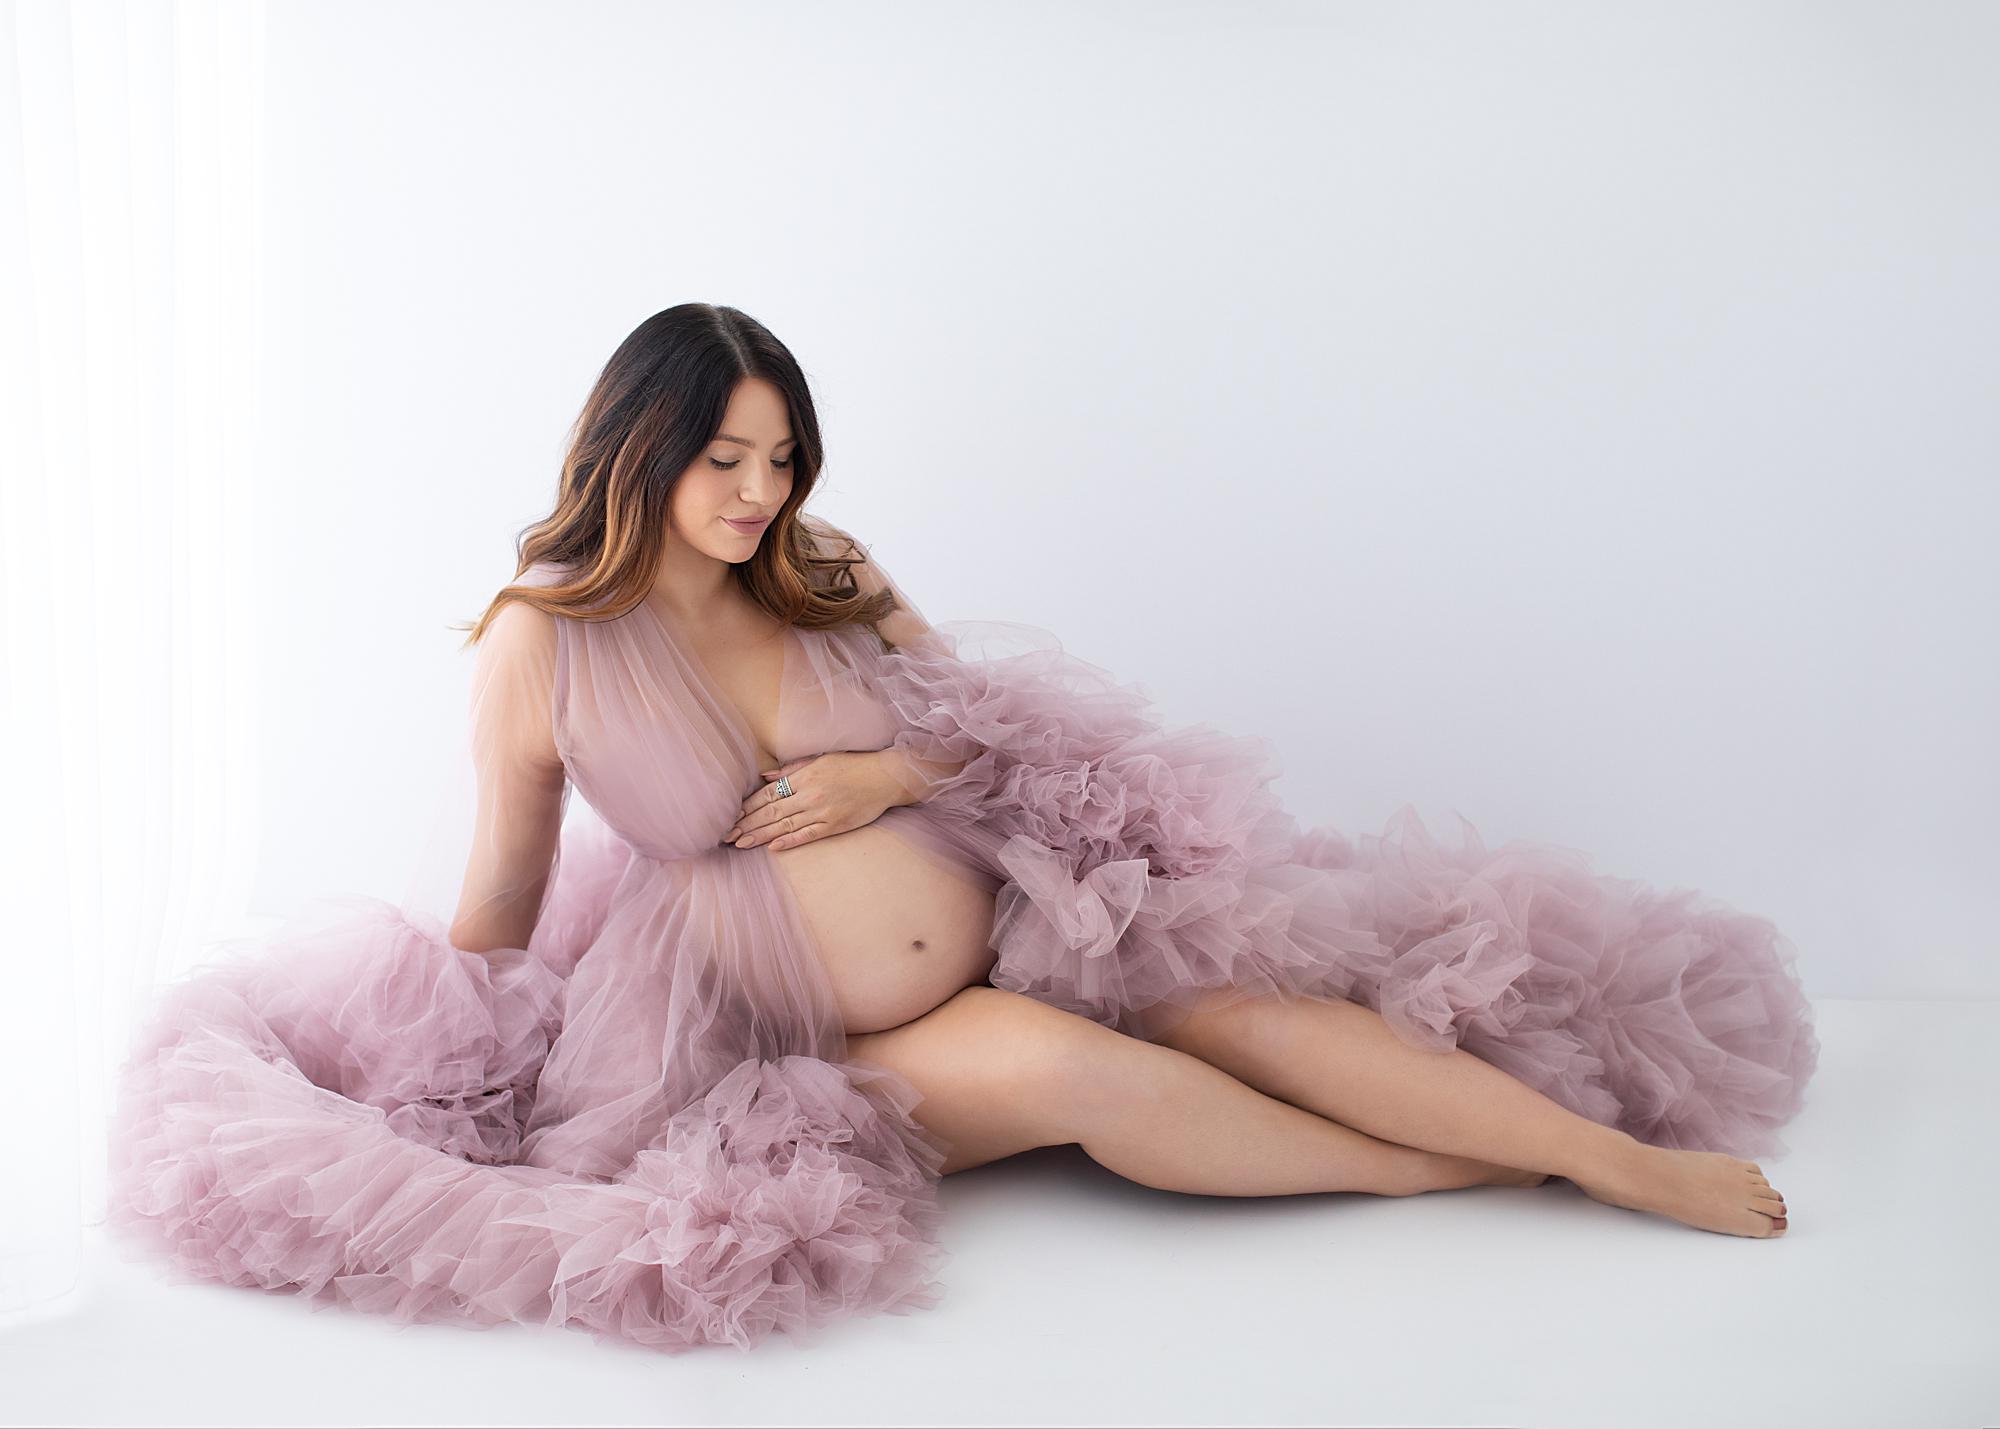 Pregnant woman posing against a white backdrop with a sheer pink gown for a maternity photoshoot in Suffolk photography studio